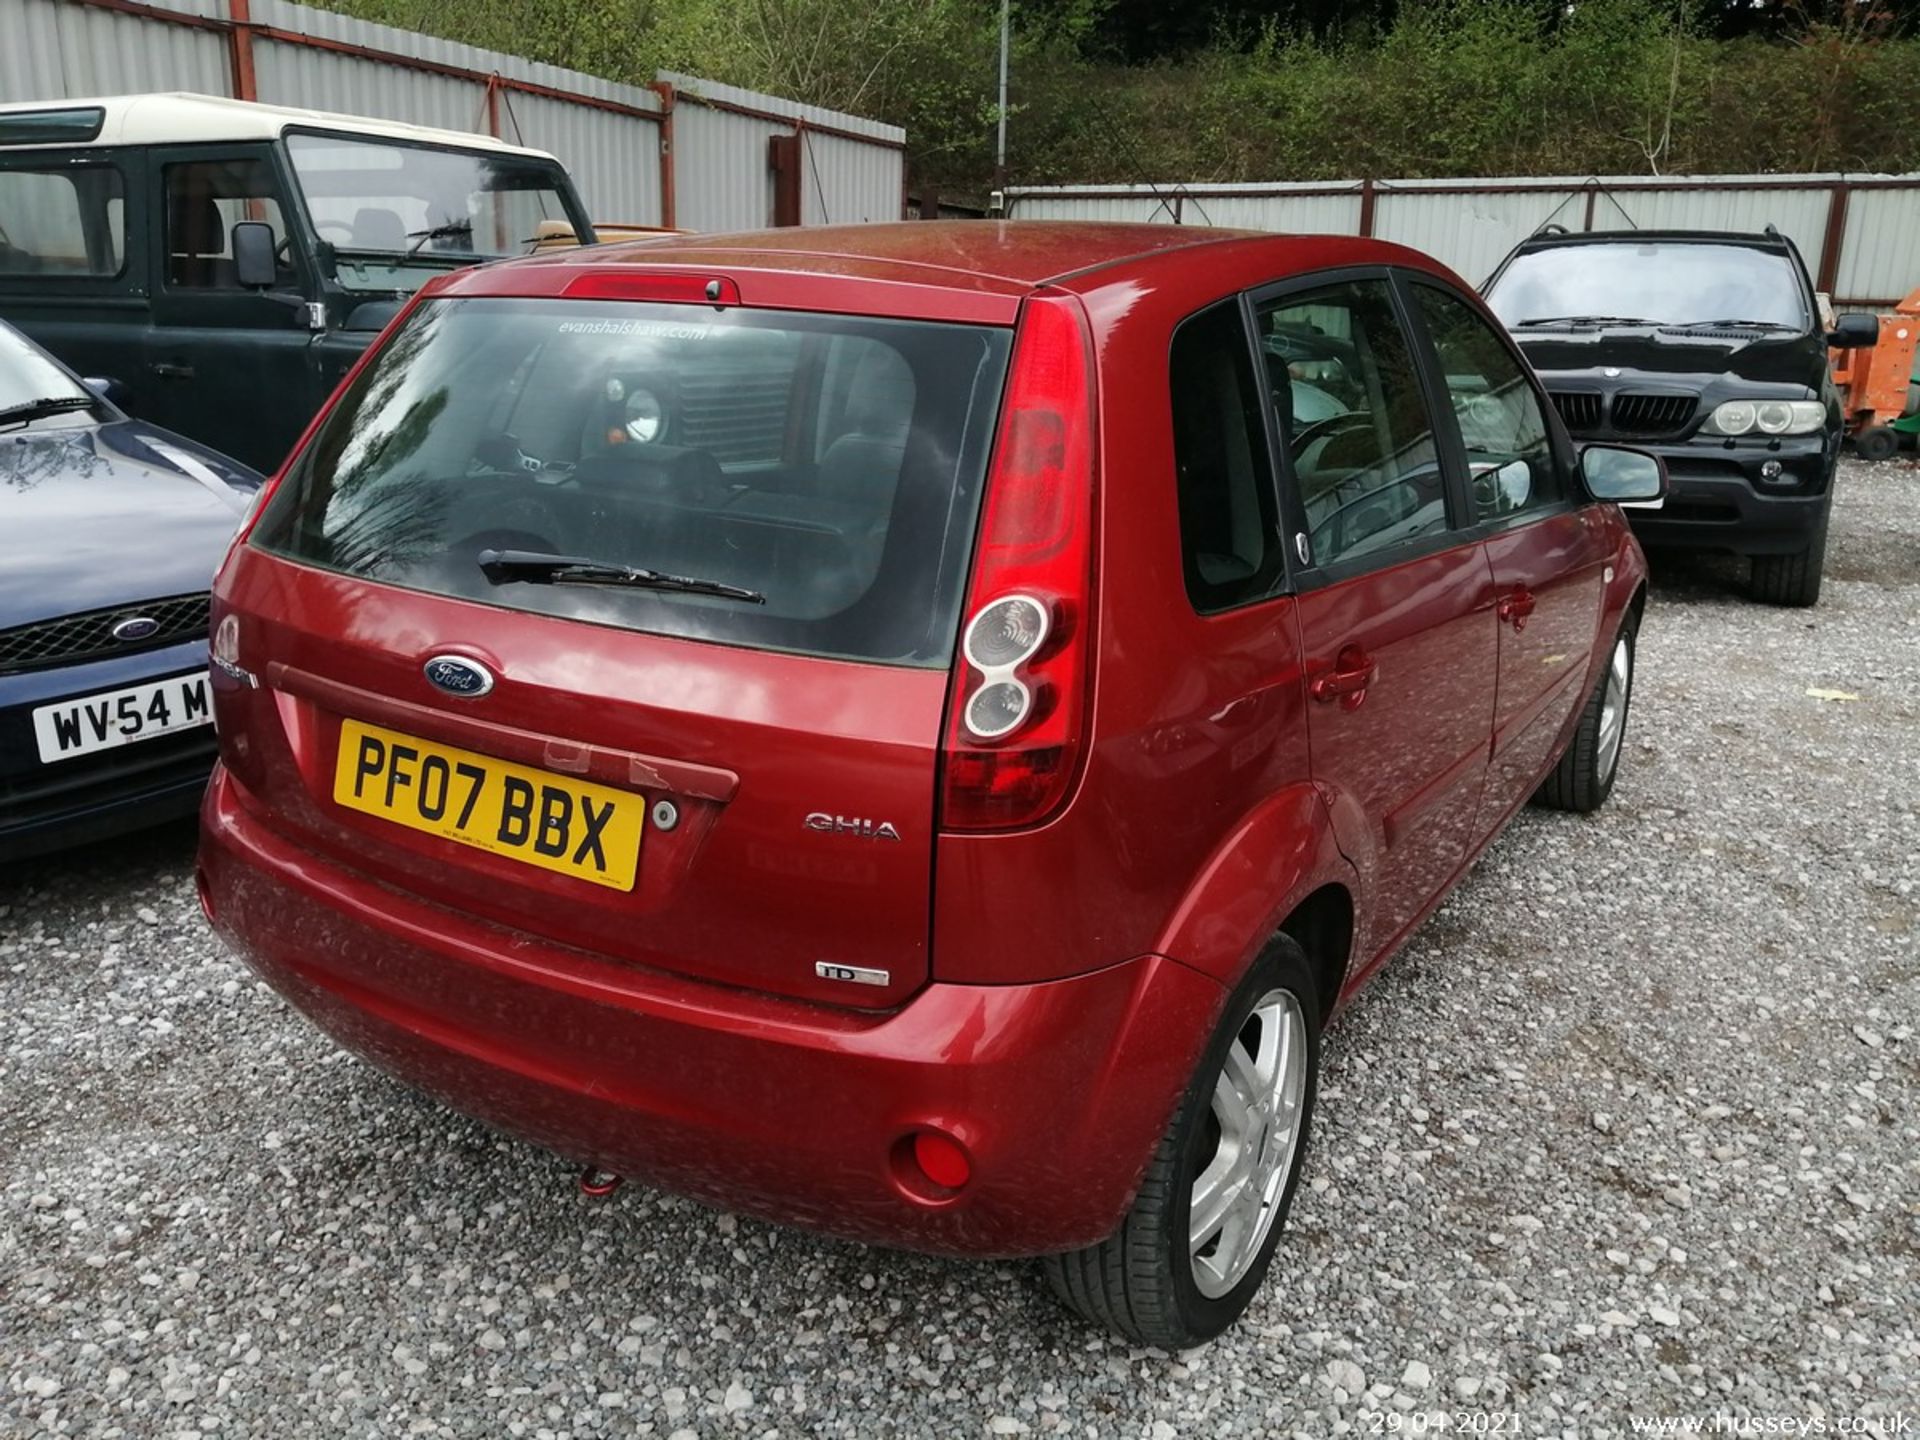 07/07 FORD FIESTA GHIA TDCI - 1399cc 5dr Hatchback (Red, 111k) - Image 6 of 11